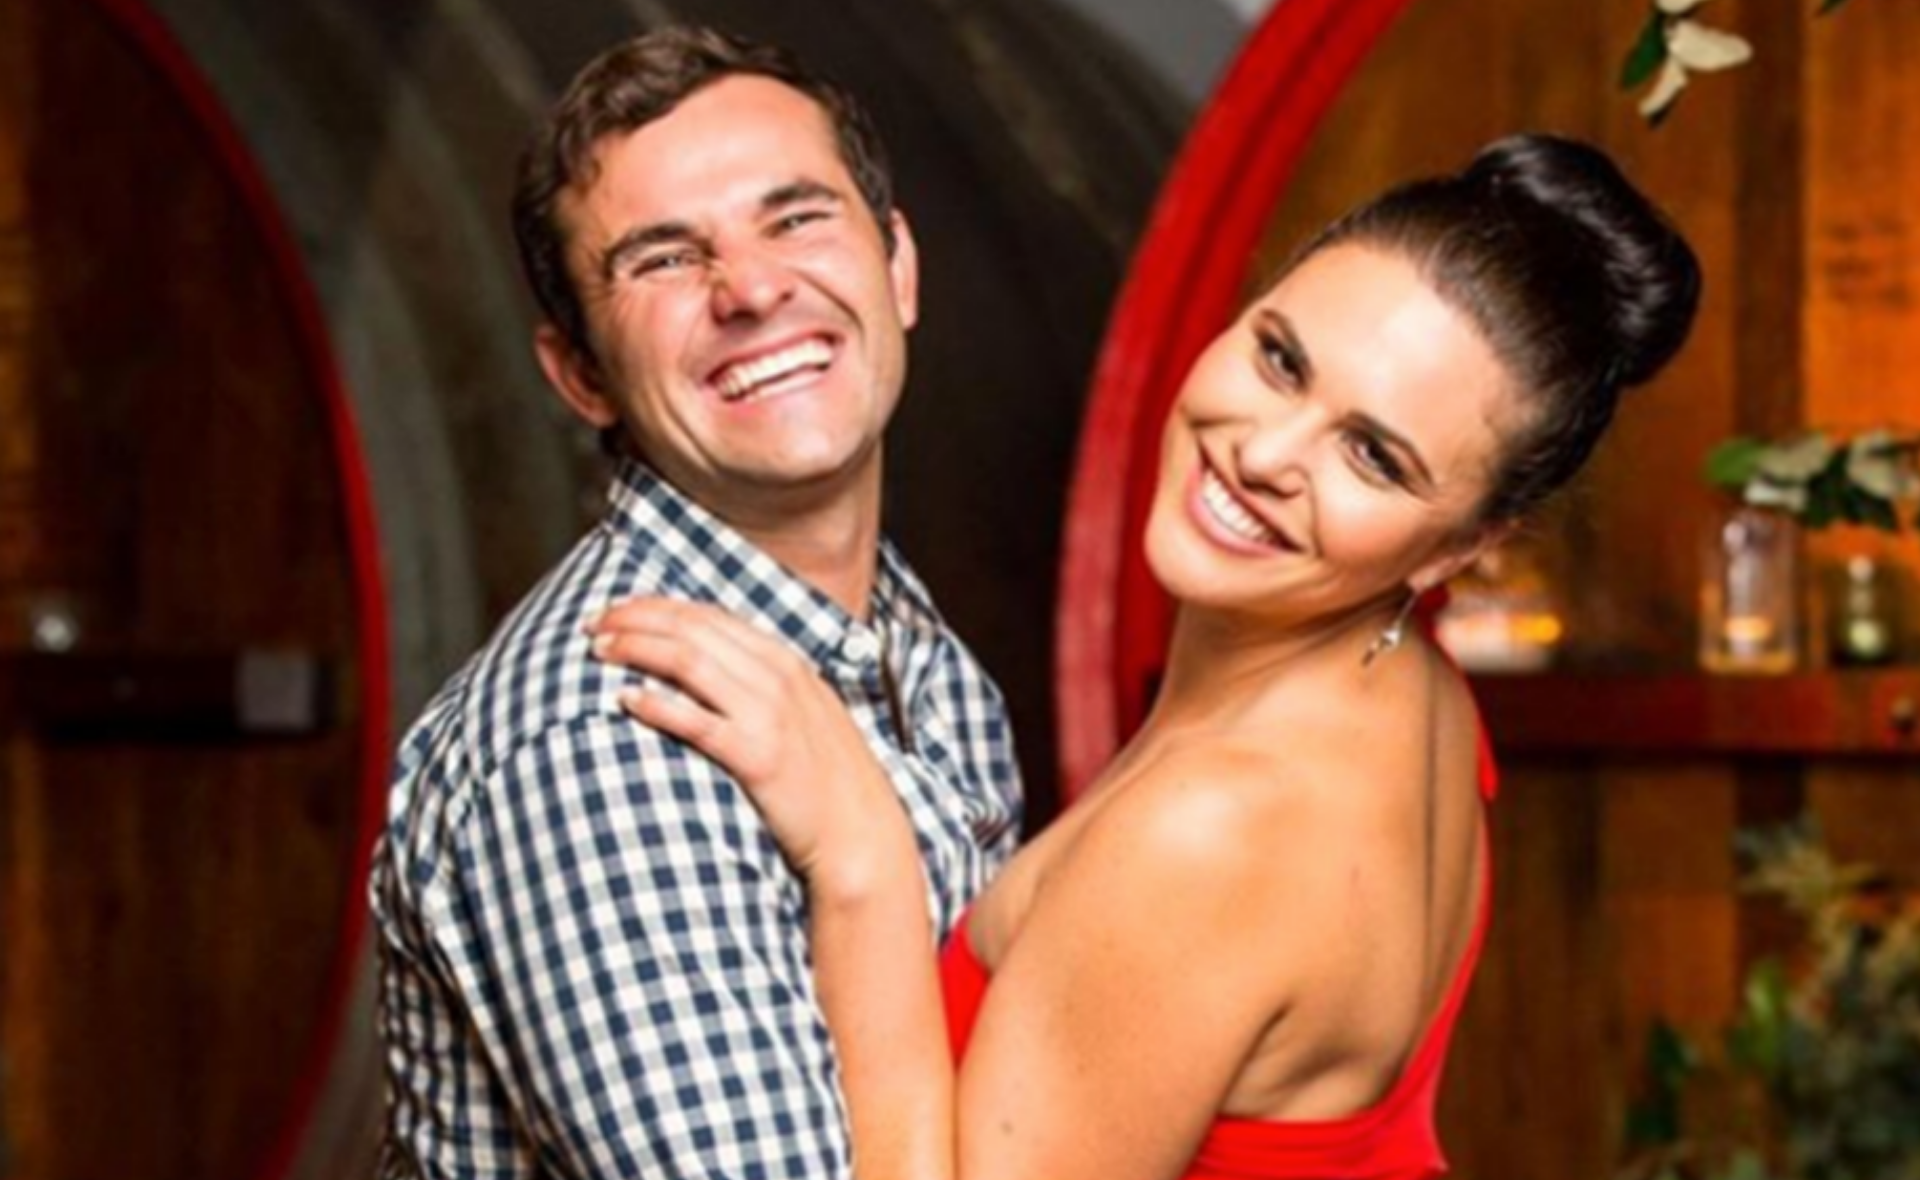 Farmer Wants A Wife’s Henrietta just revealed she and Farmer Alex “were never together” following their shock finale reunion